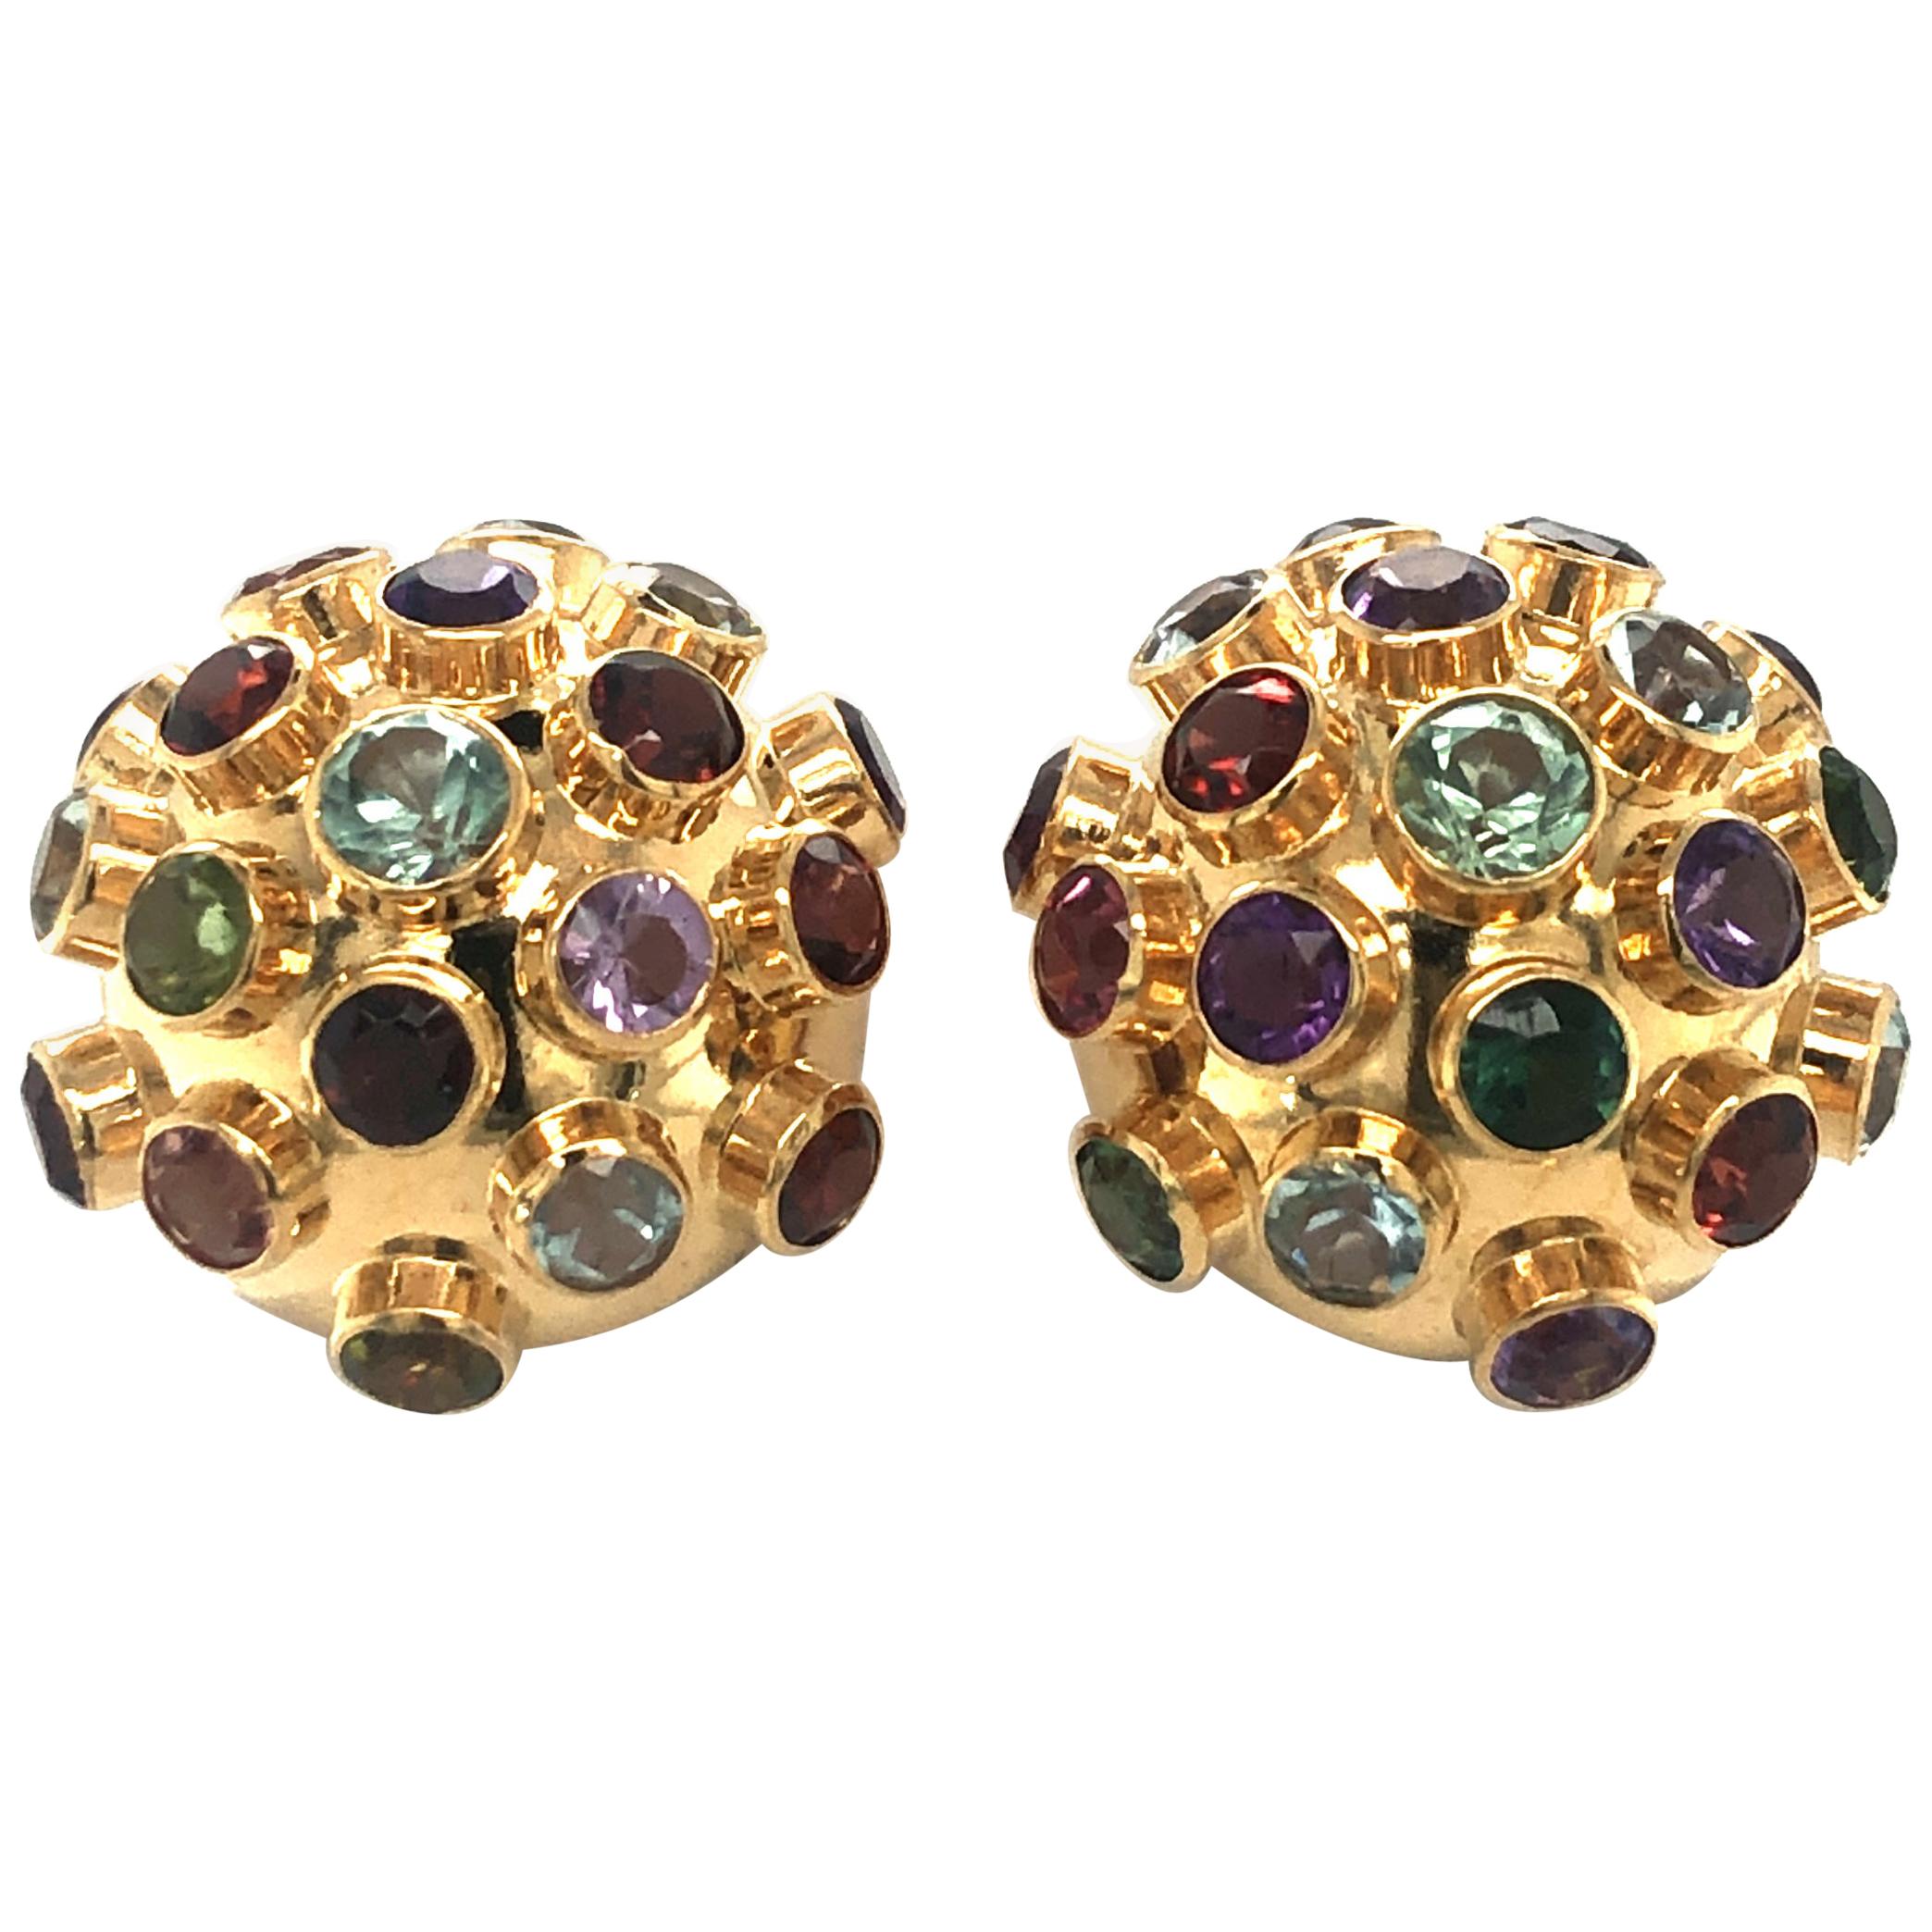 H. Stern Sputnik Earclips with Colored Gemstones in 18 Karat Yellow Gold